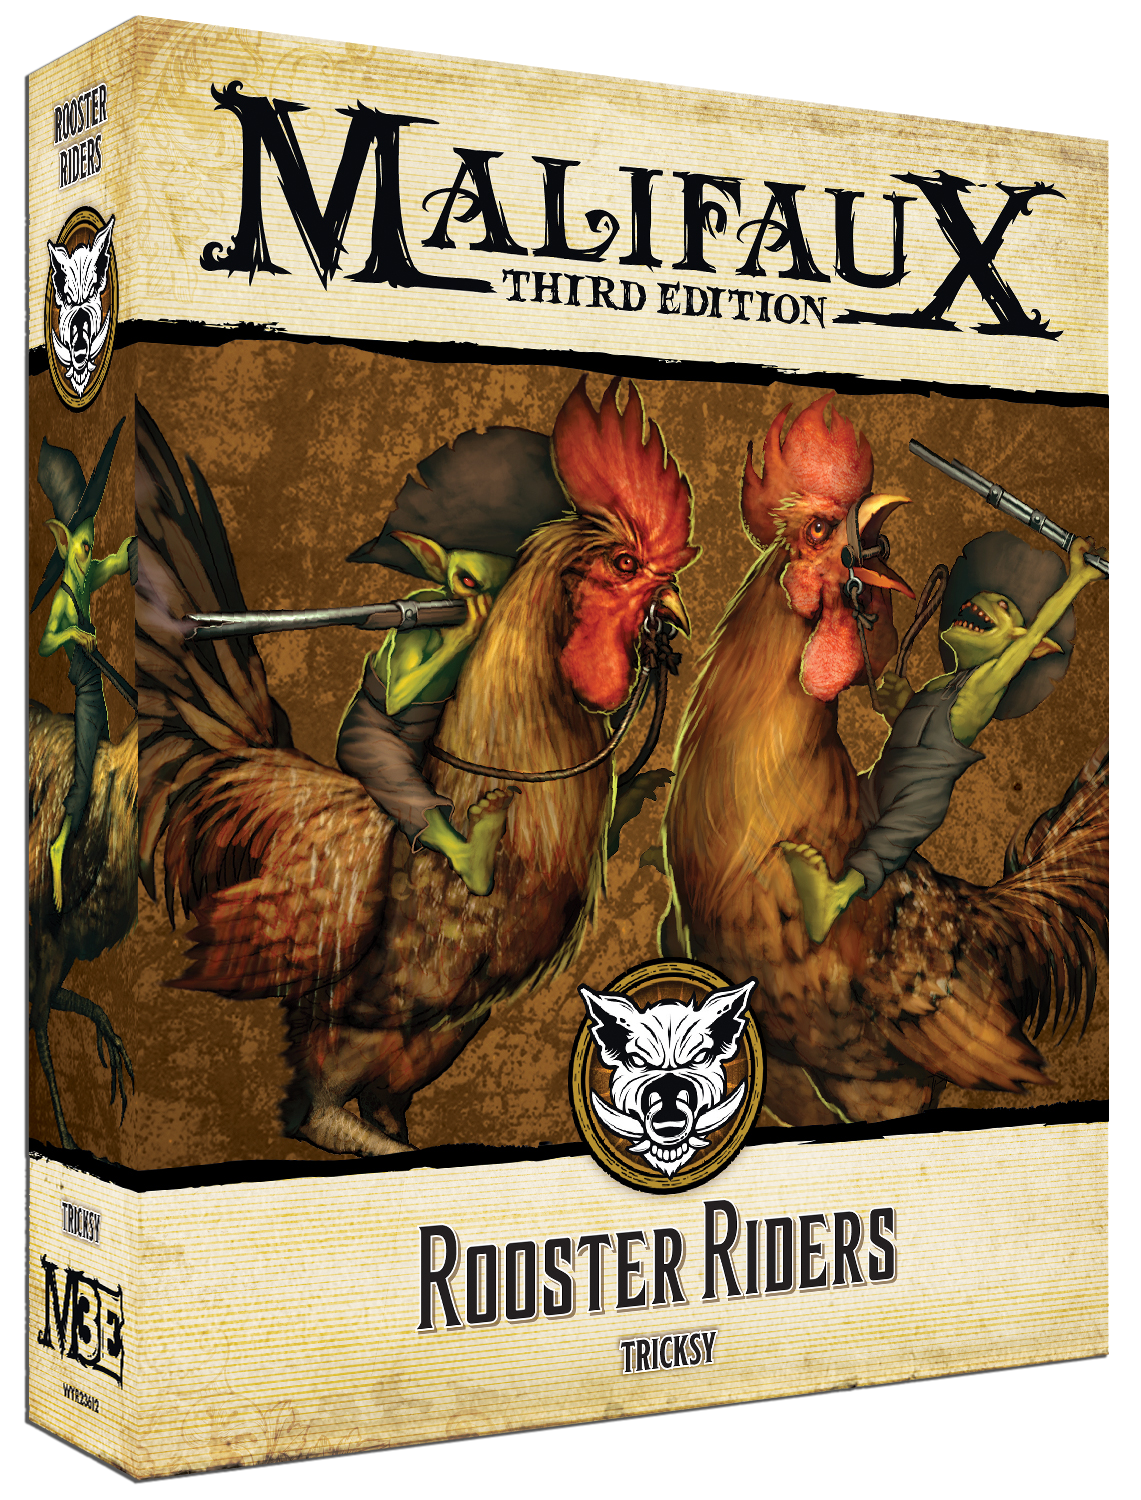 ROOSTER RIDERS